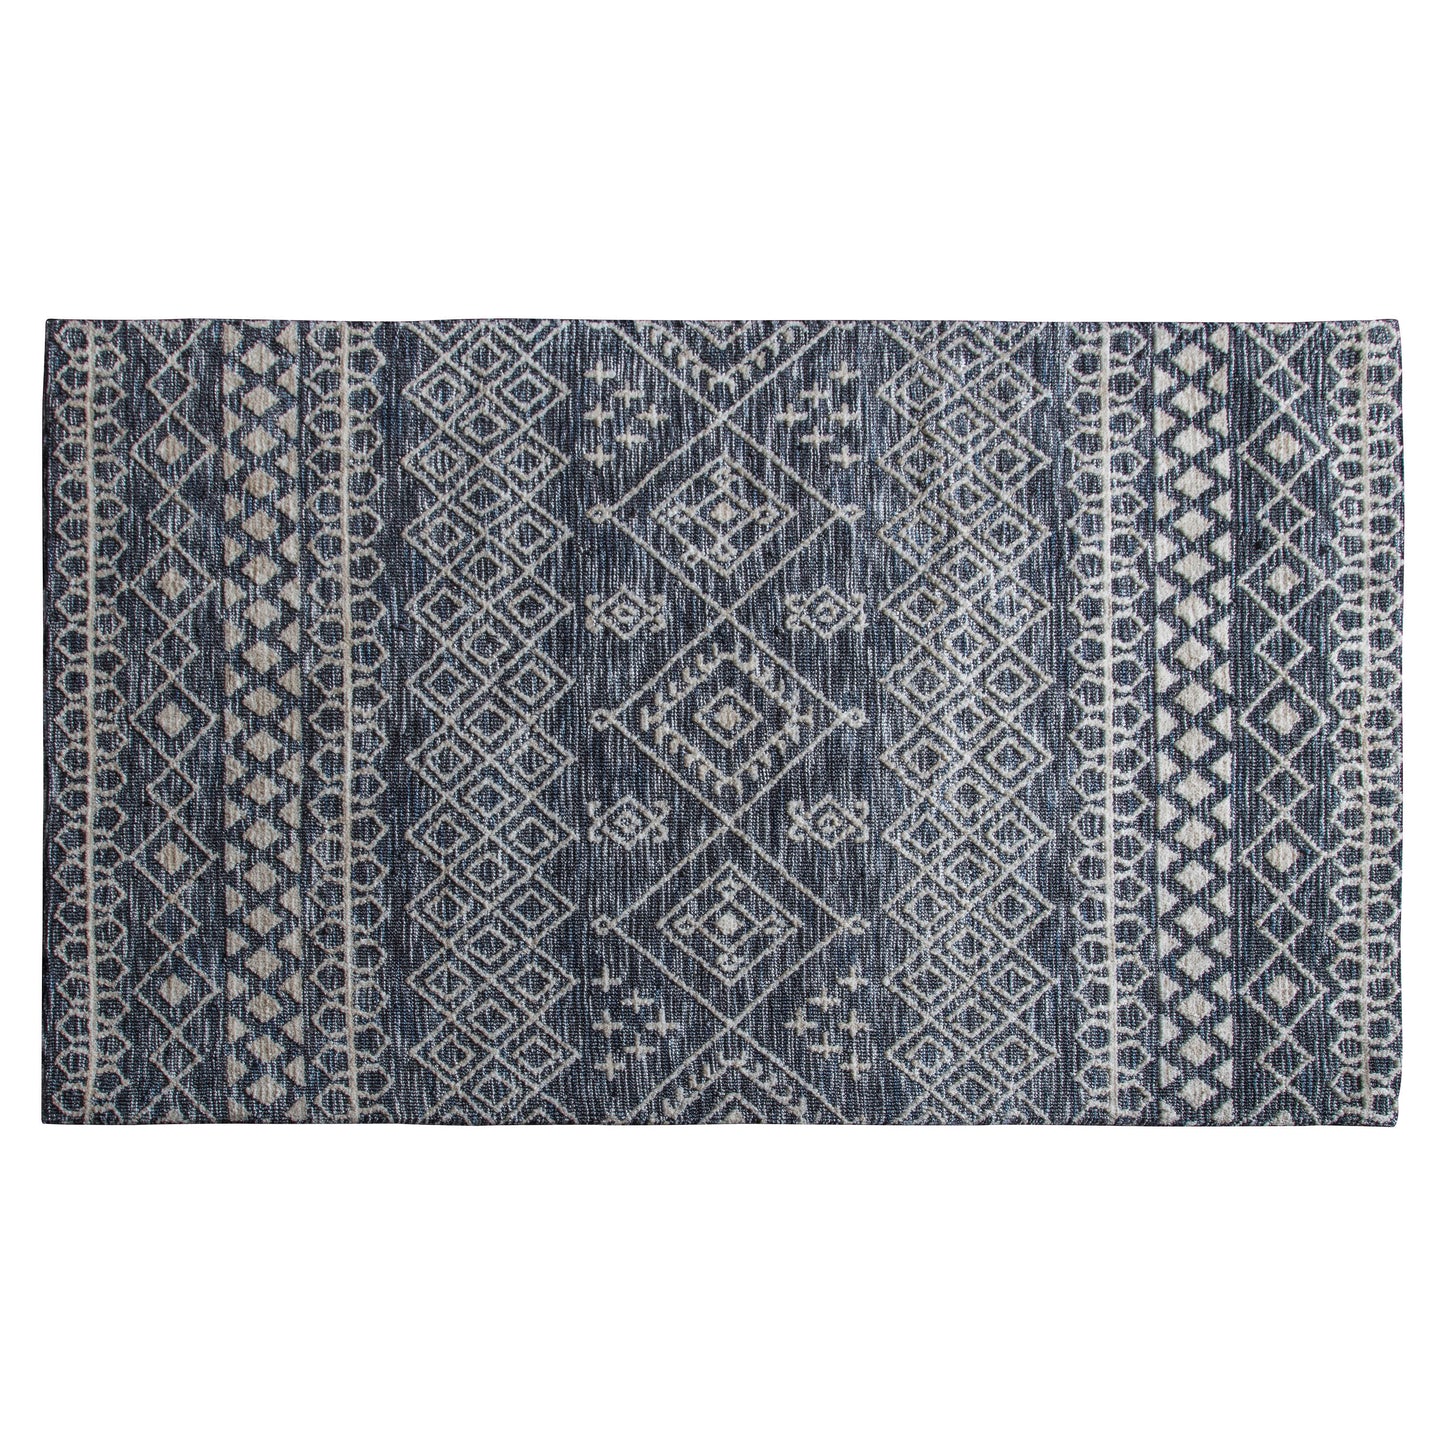 Load image into Gallery viewer, A geometric Plaza Rug Dark Teal 800x1500mm for interior decor from Kikiathome.co.uk.
